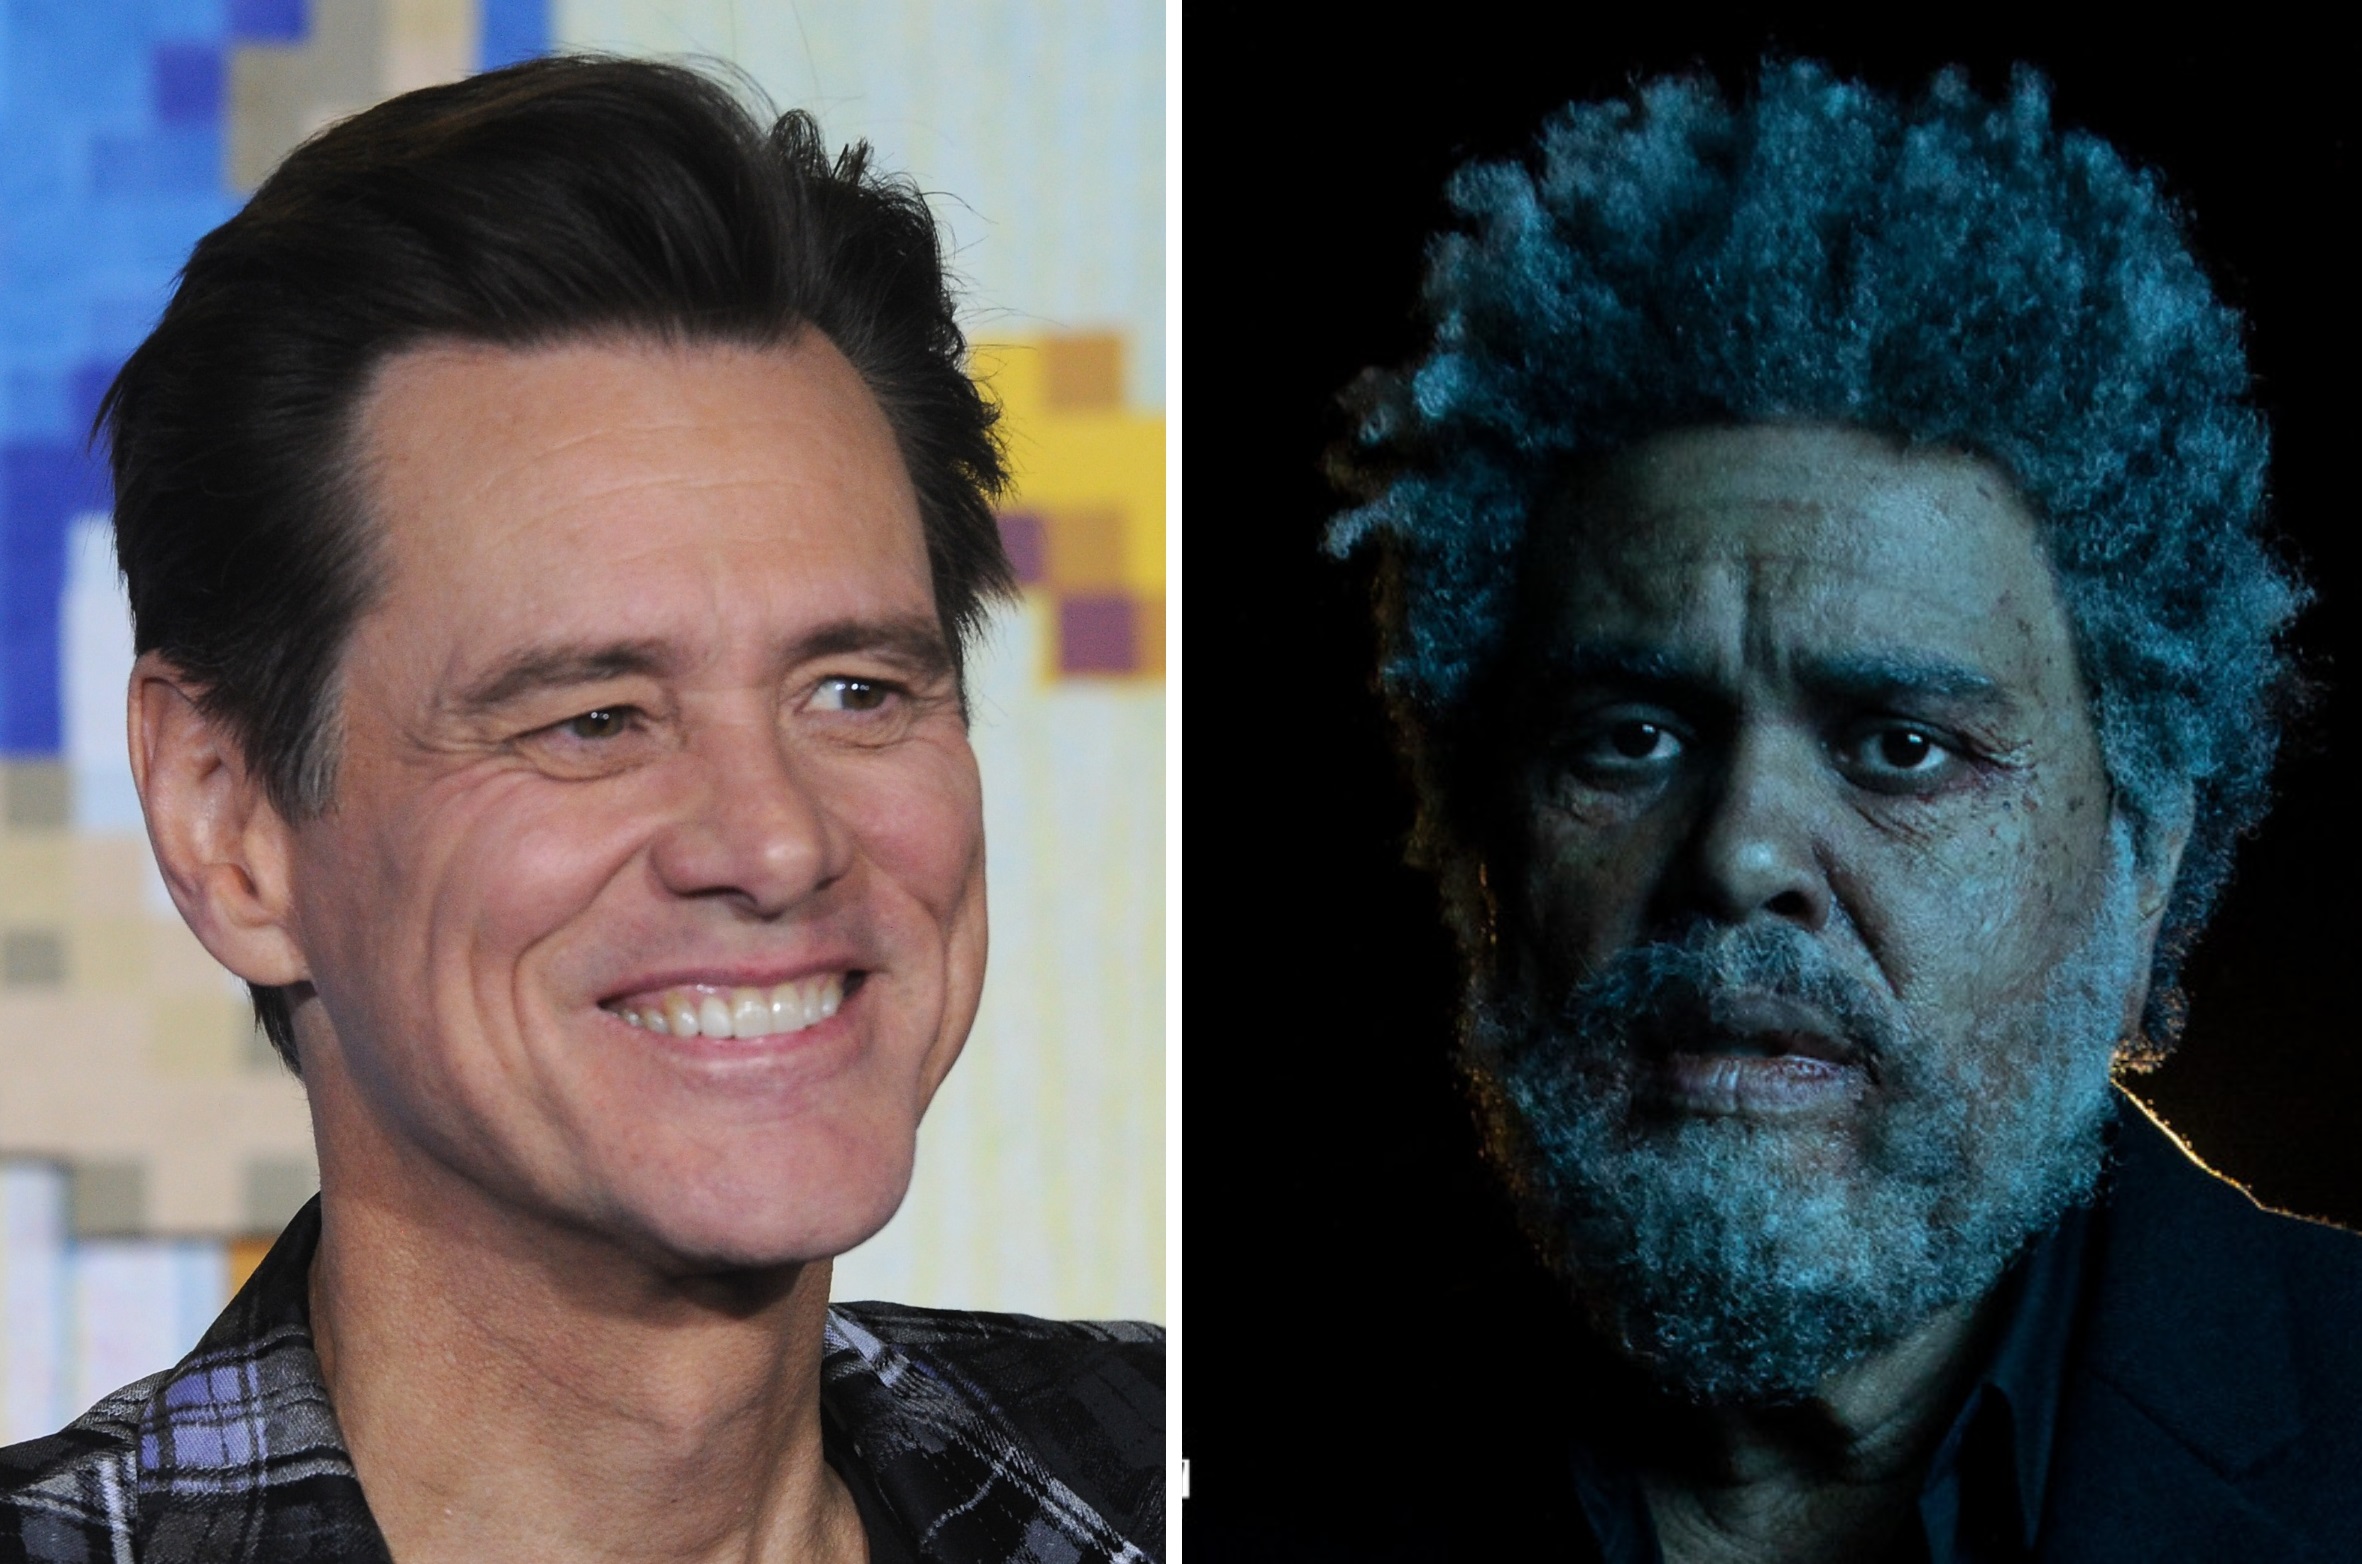 Jim Carrey makes an eerie appearance in The Weeknd's new music video